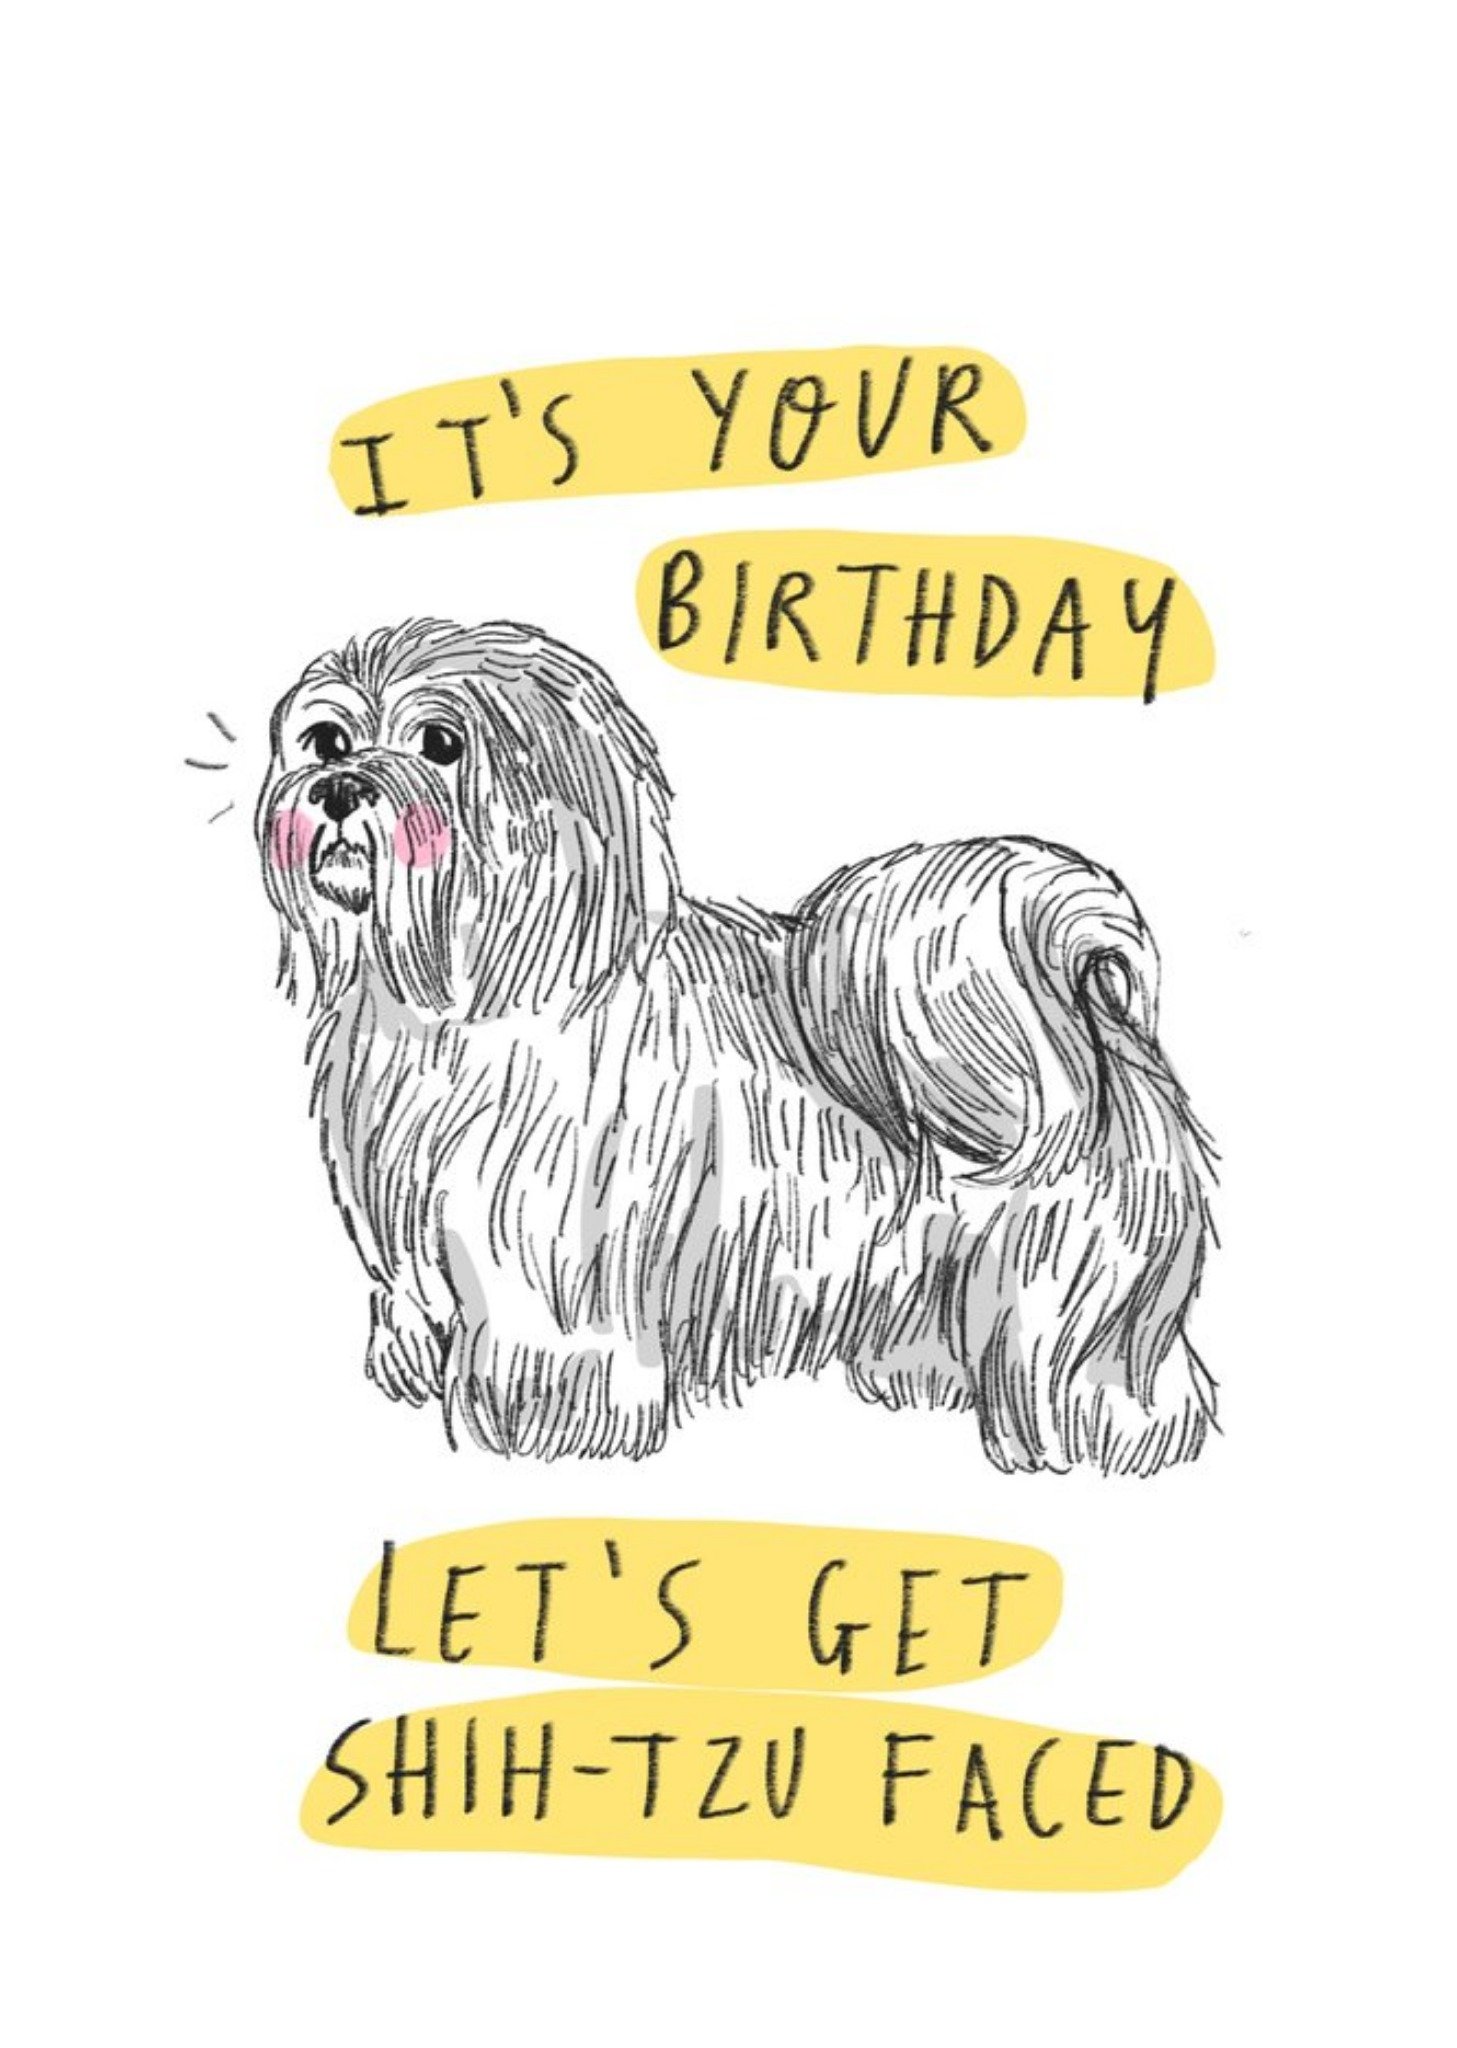 Moonpig Funny Its Your Birthday Lets Get Shih-Tzu Faced Card, Large